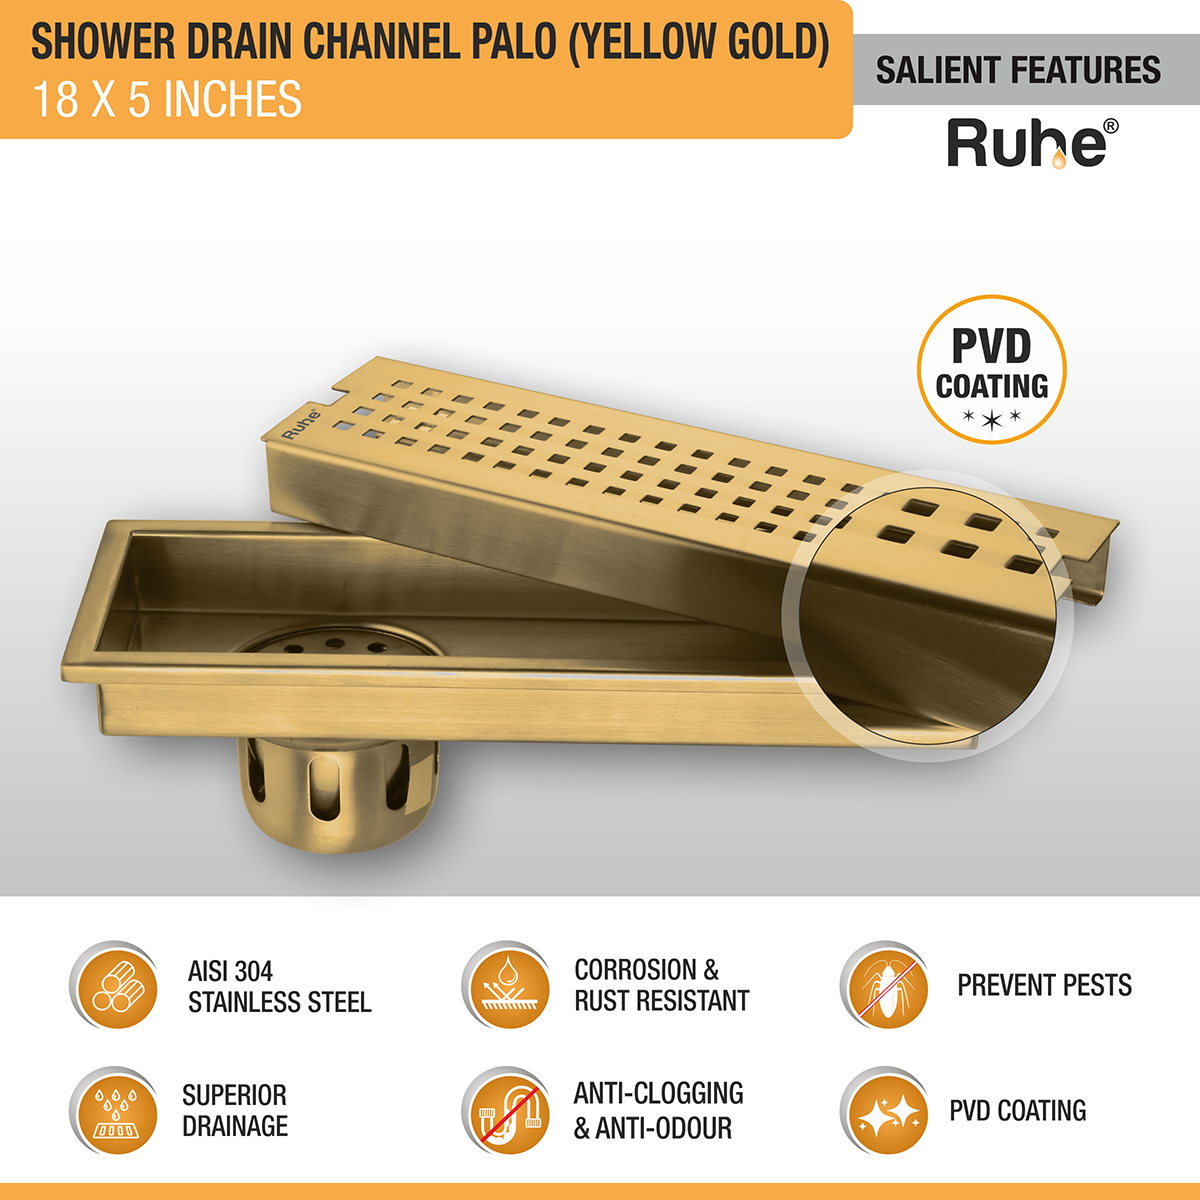 Palo Shower Drain Channel (18 x 5 Inches) YELLOW GOLD features